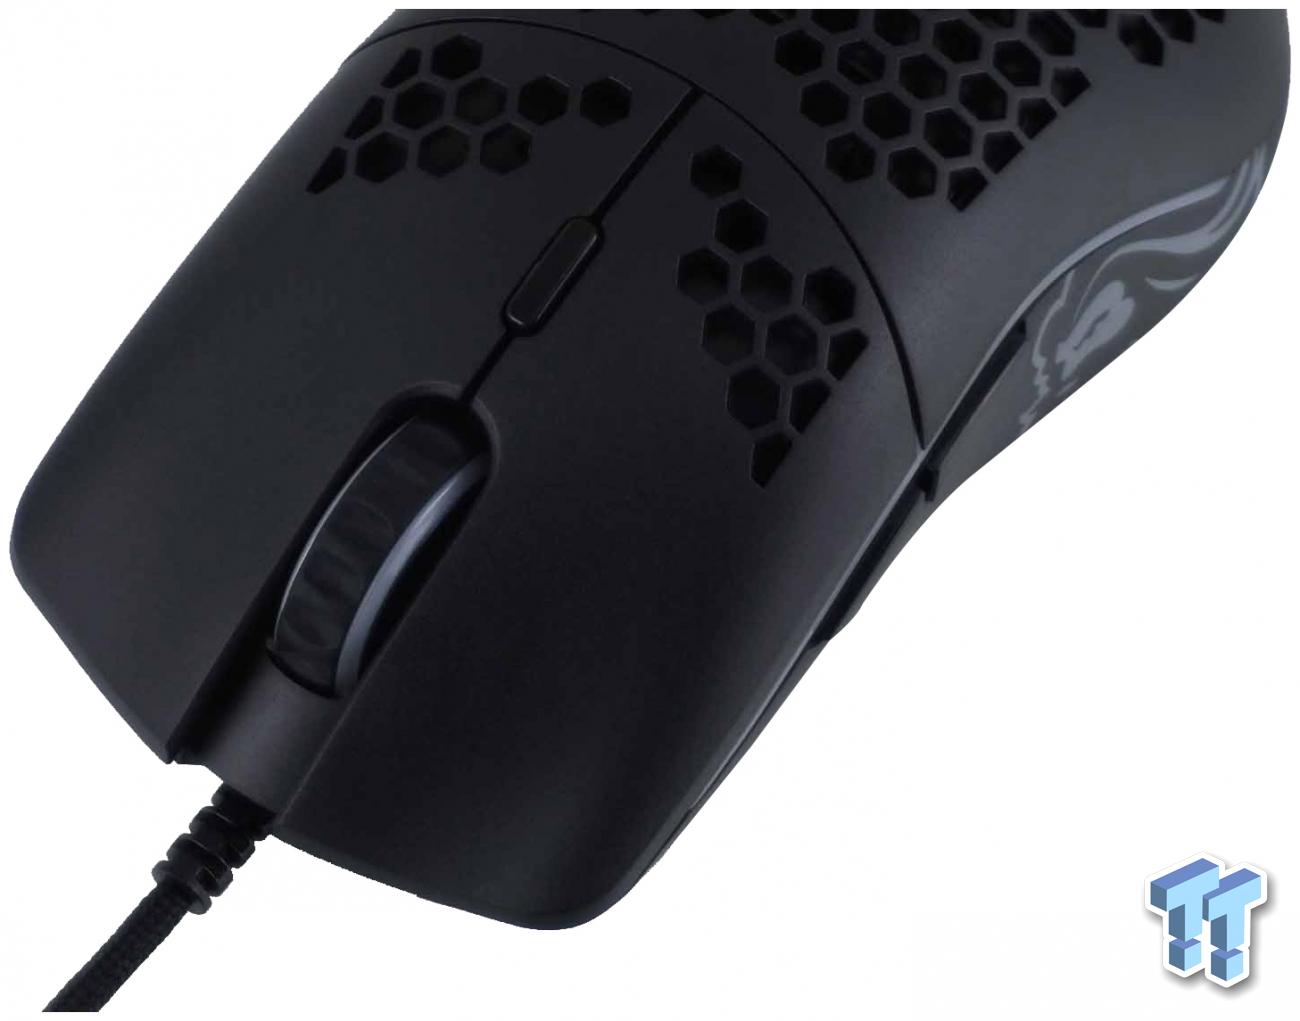 Glorious Pc Gaming Race Model O Gaming Mouse Review Tweaktown